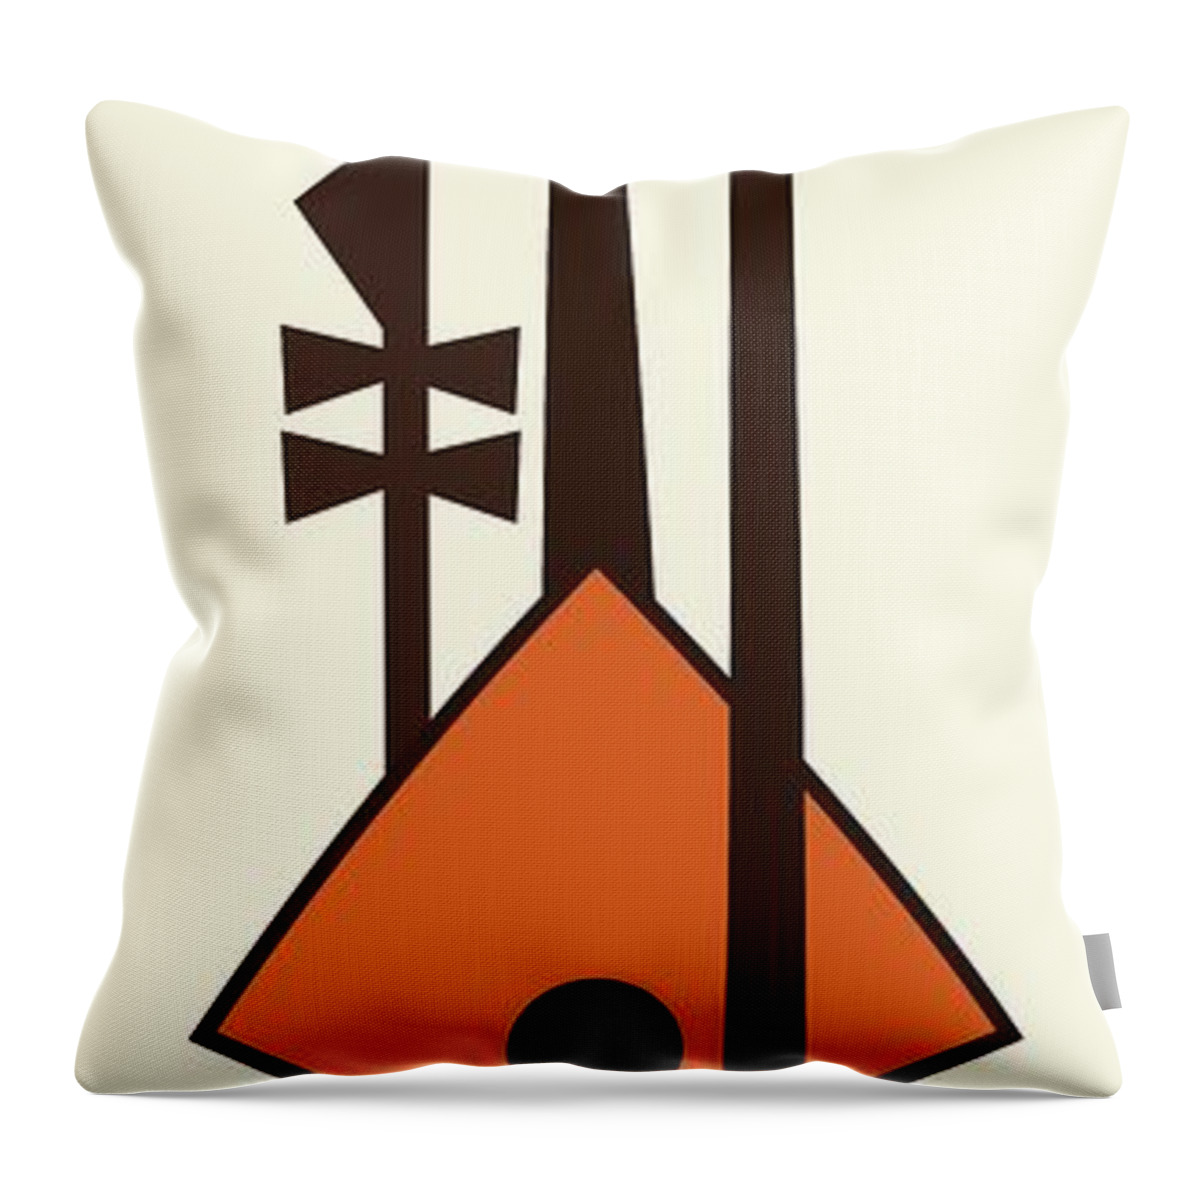 Mid Century Modern Throw Pillow featuring the digital art Musical Instruments 2 by Donna Mibus